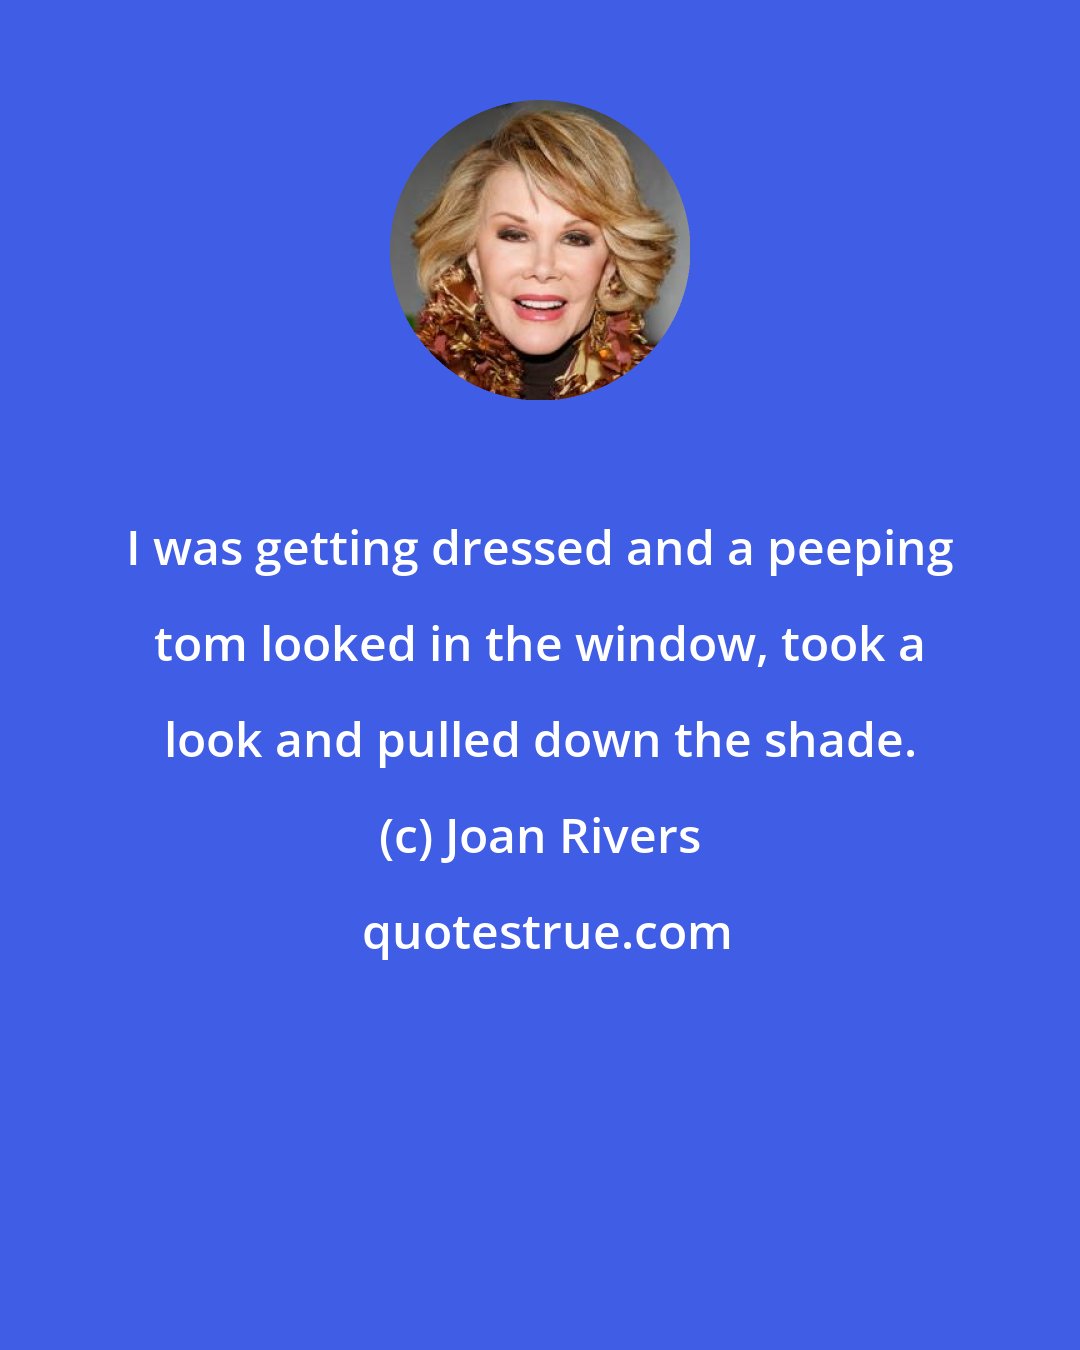 Joan Rivers: I was getting dressed and a peeping tom looked in the window, took a look and pulled down the shade.